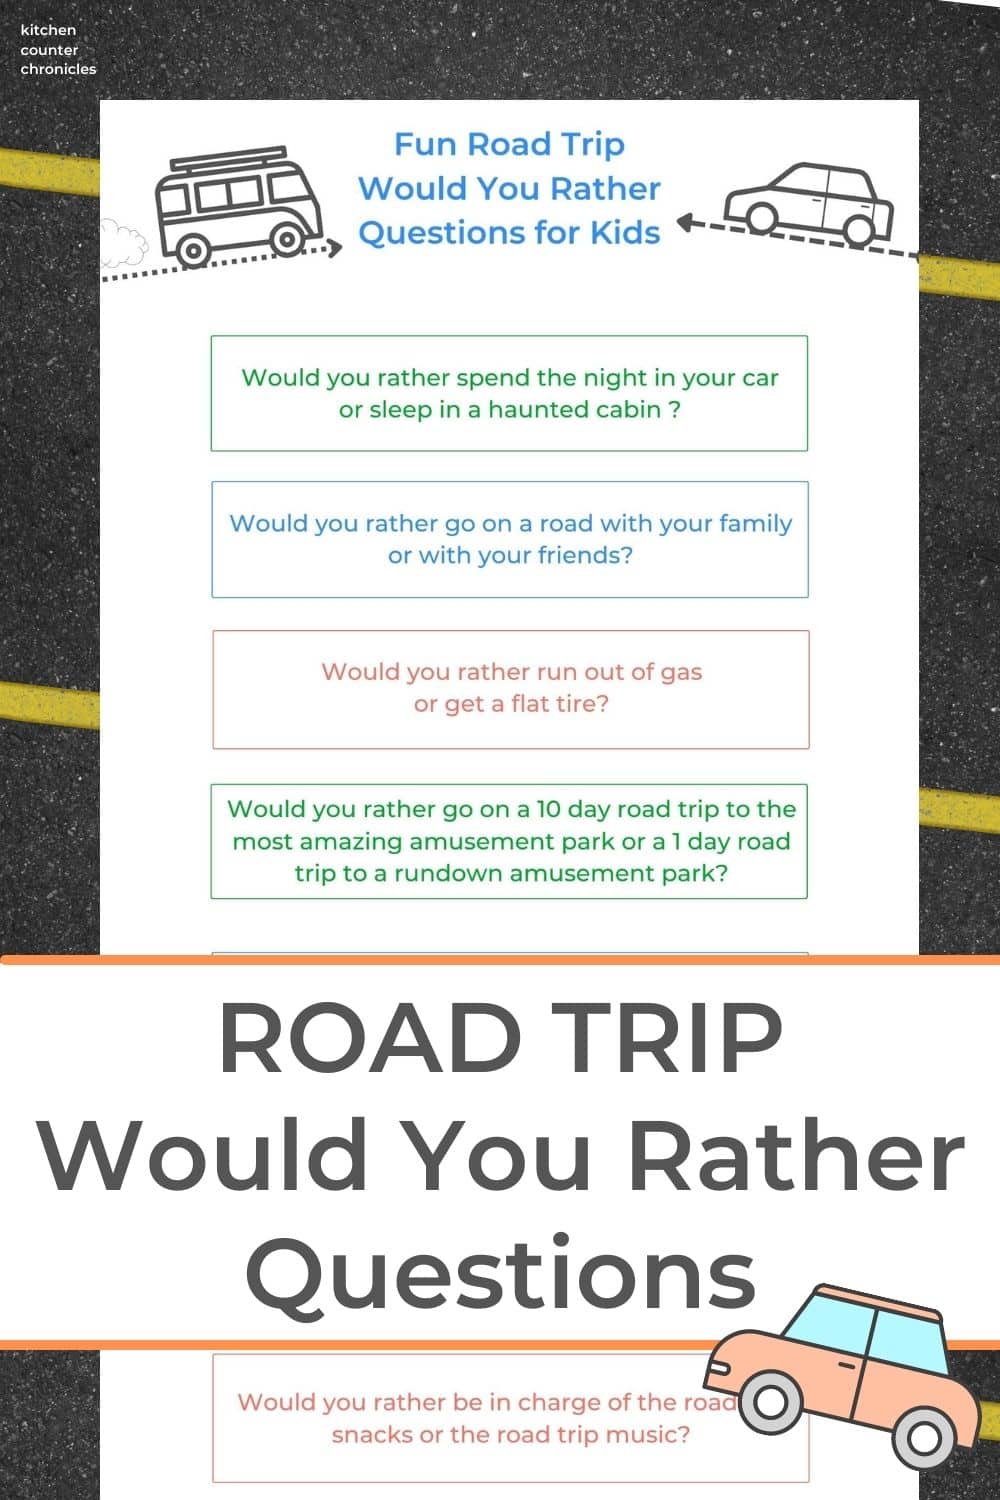 Fun Road Trip Would You Rather Questions